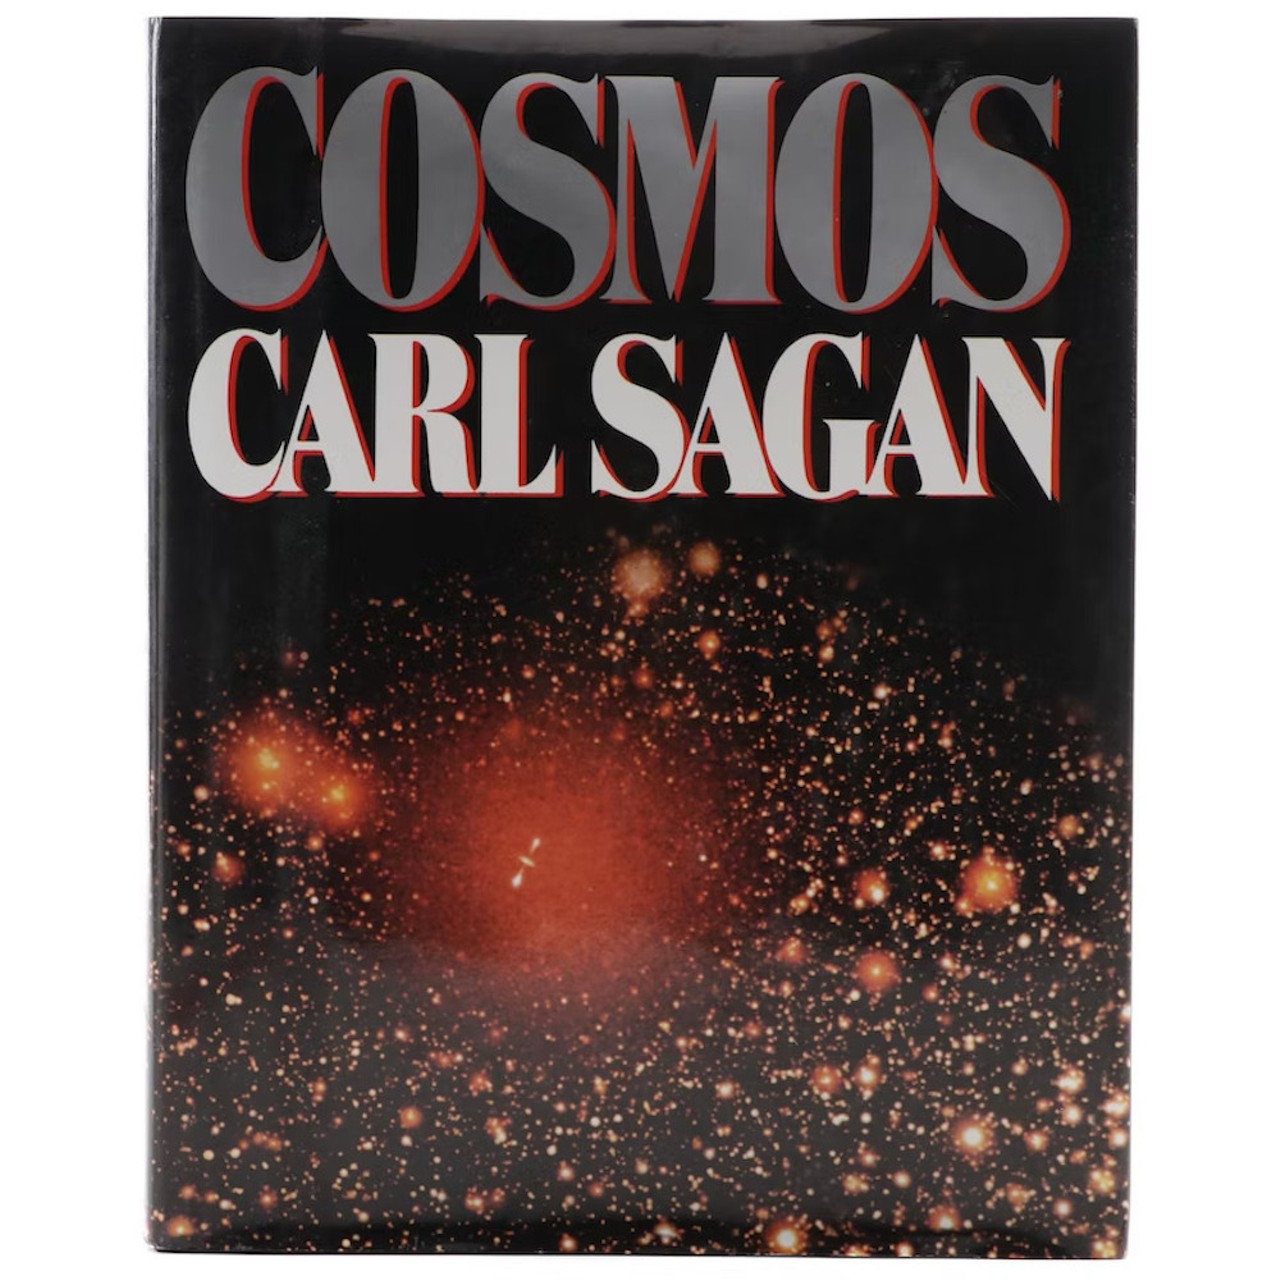 First Edition Thus "Cosmos" by Carl Sagan, 1995
Here’s a twist on the star atop the tree – a first edition of "Cosmos" by Carl Sagan from 1995. Sagan fans will appreciate the vintage copy of seminal scientific literature. Slip some tickets to the Cincinnati Observatory in the pages for a complete cosmic gift. Viewing season for Jupiter and Mars starts Dec. 16!